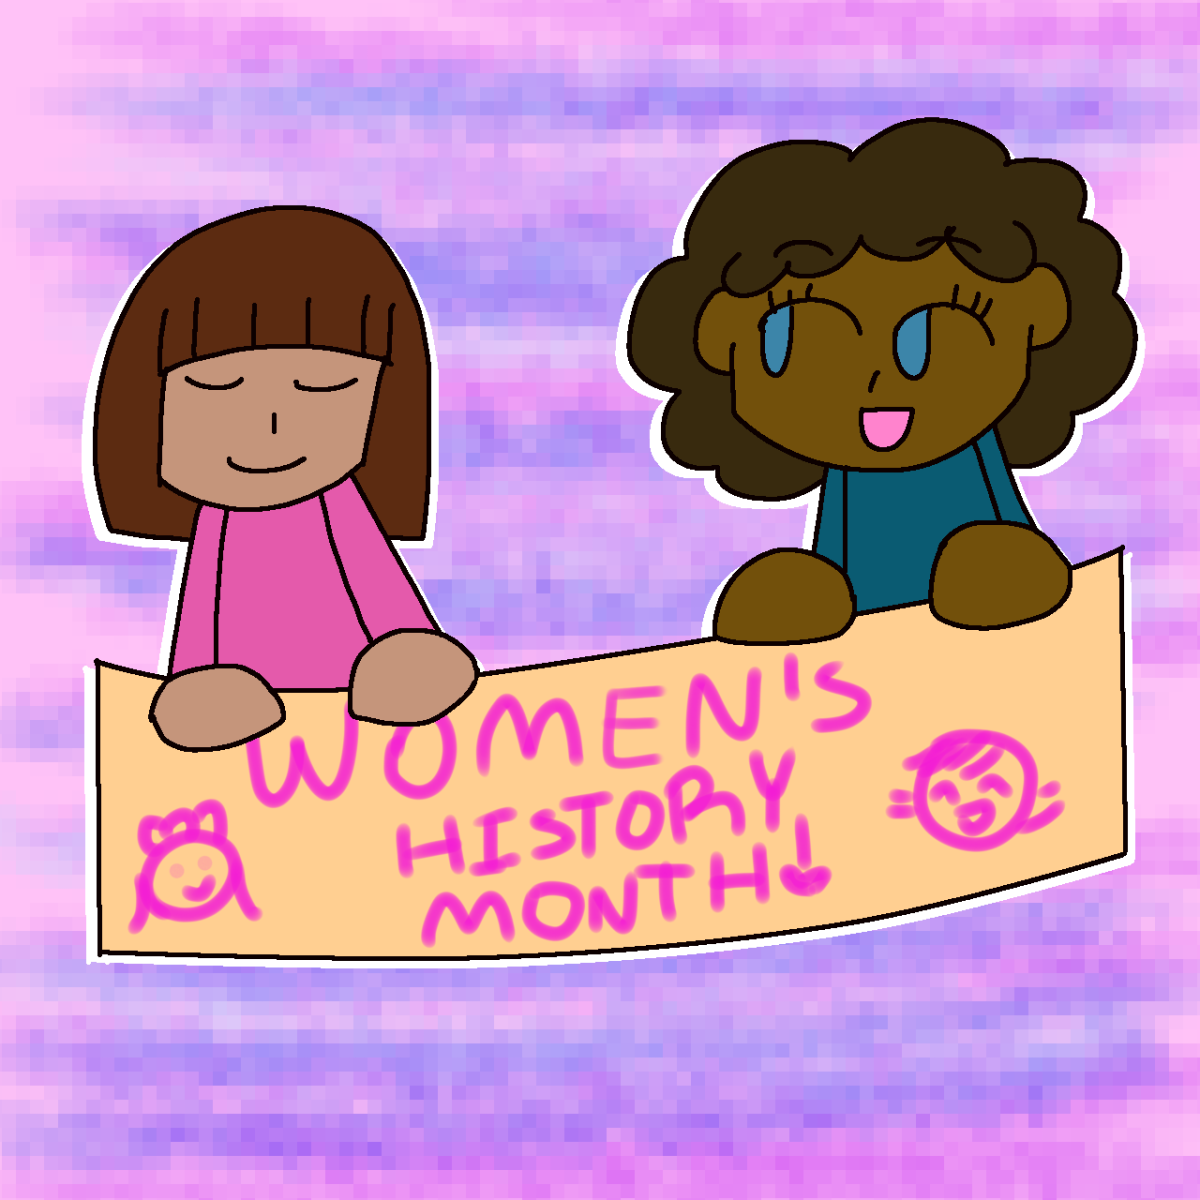 Two+figures+hold+a+banner+that+reads+%E2%80%9CWomen%E2%80%99s+History+Month%E2%80%9D+in+front+of+a+pink+and+purple+colored+background.+As+Women%E2%80%99s+History+Month+comes+to+an+end%2C+it%E2%80%99s+important+to+acknowledge+the+pivotal+role+women+have+had+in+shaping+society.+%28Mary+Ngo+%7C+Northern+Star%29